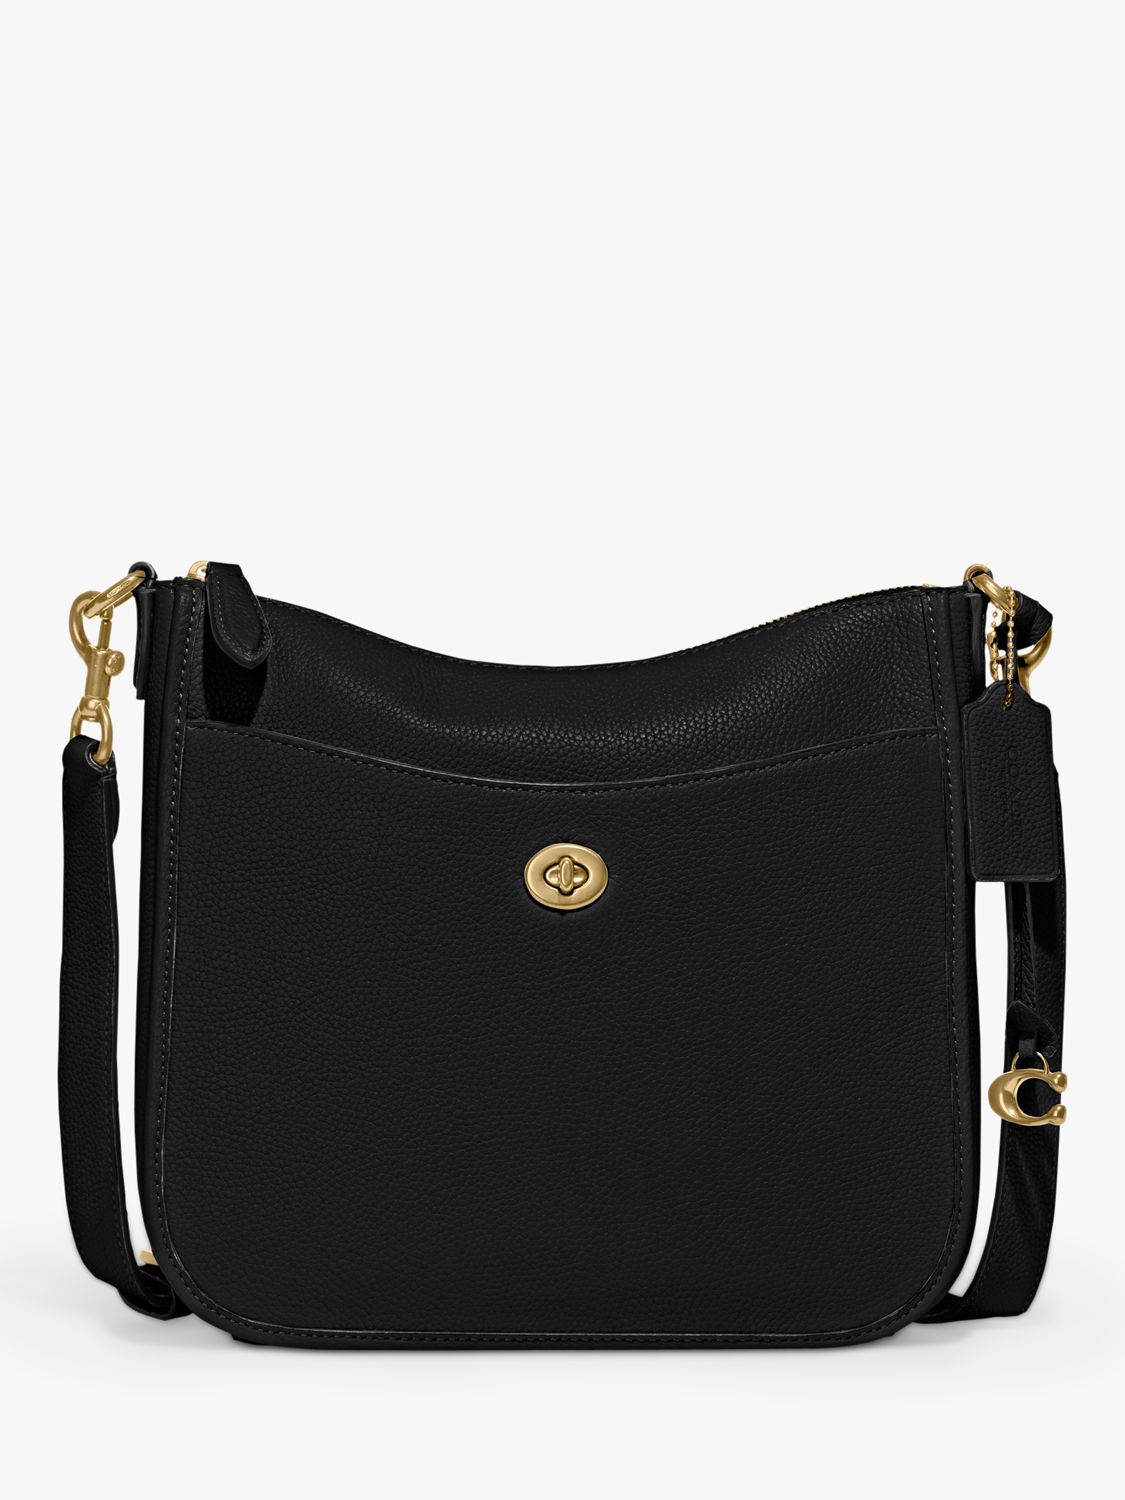 Coach Chaise Large Leather Cross Body Bag, Black at John Lewis & Partners